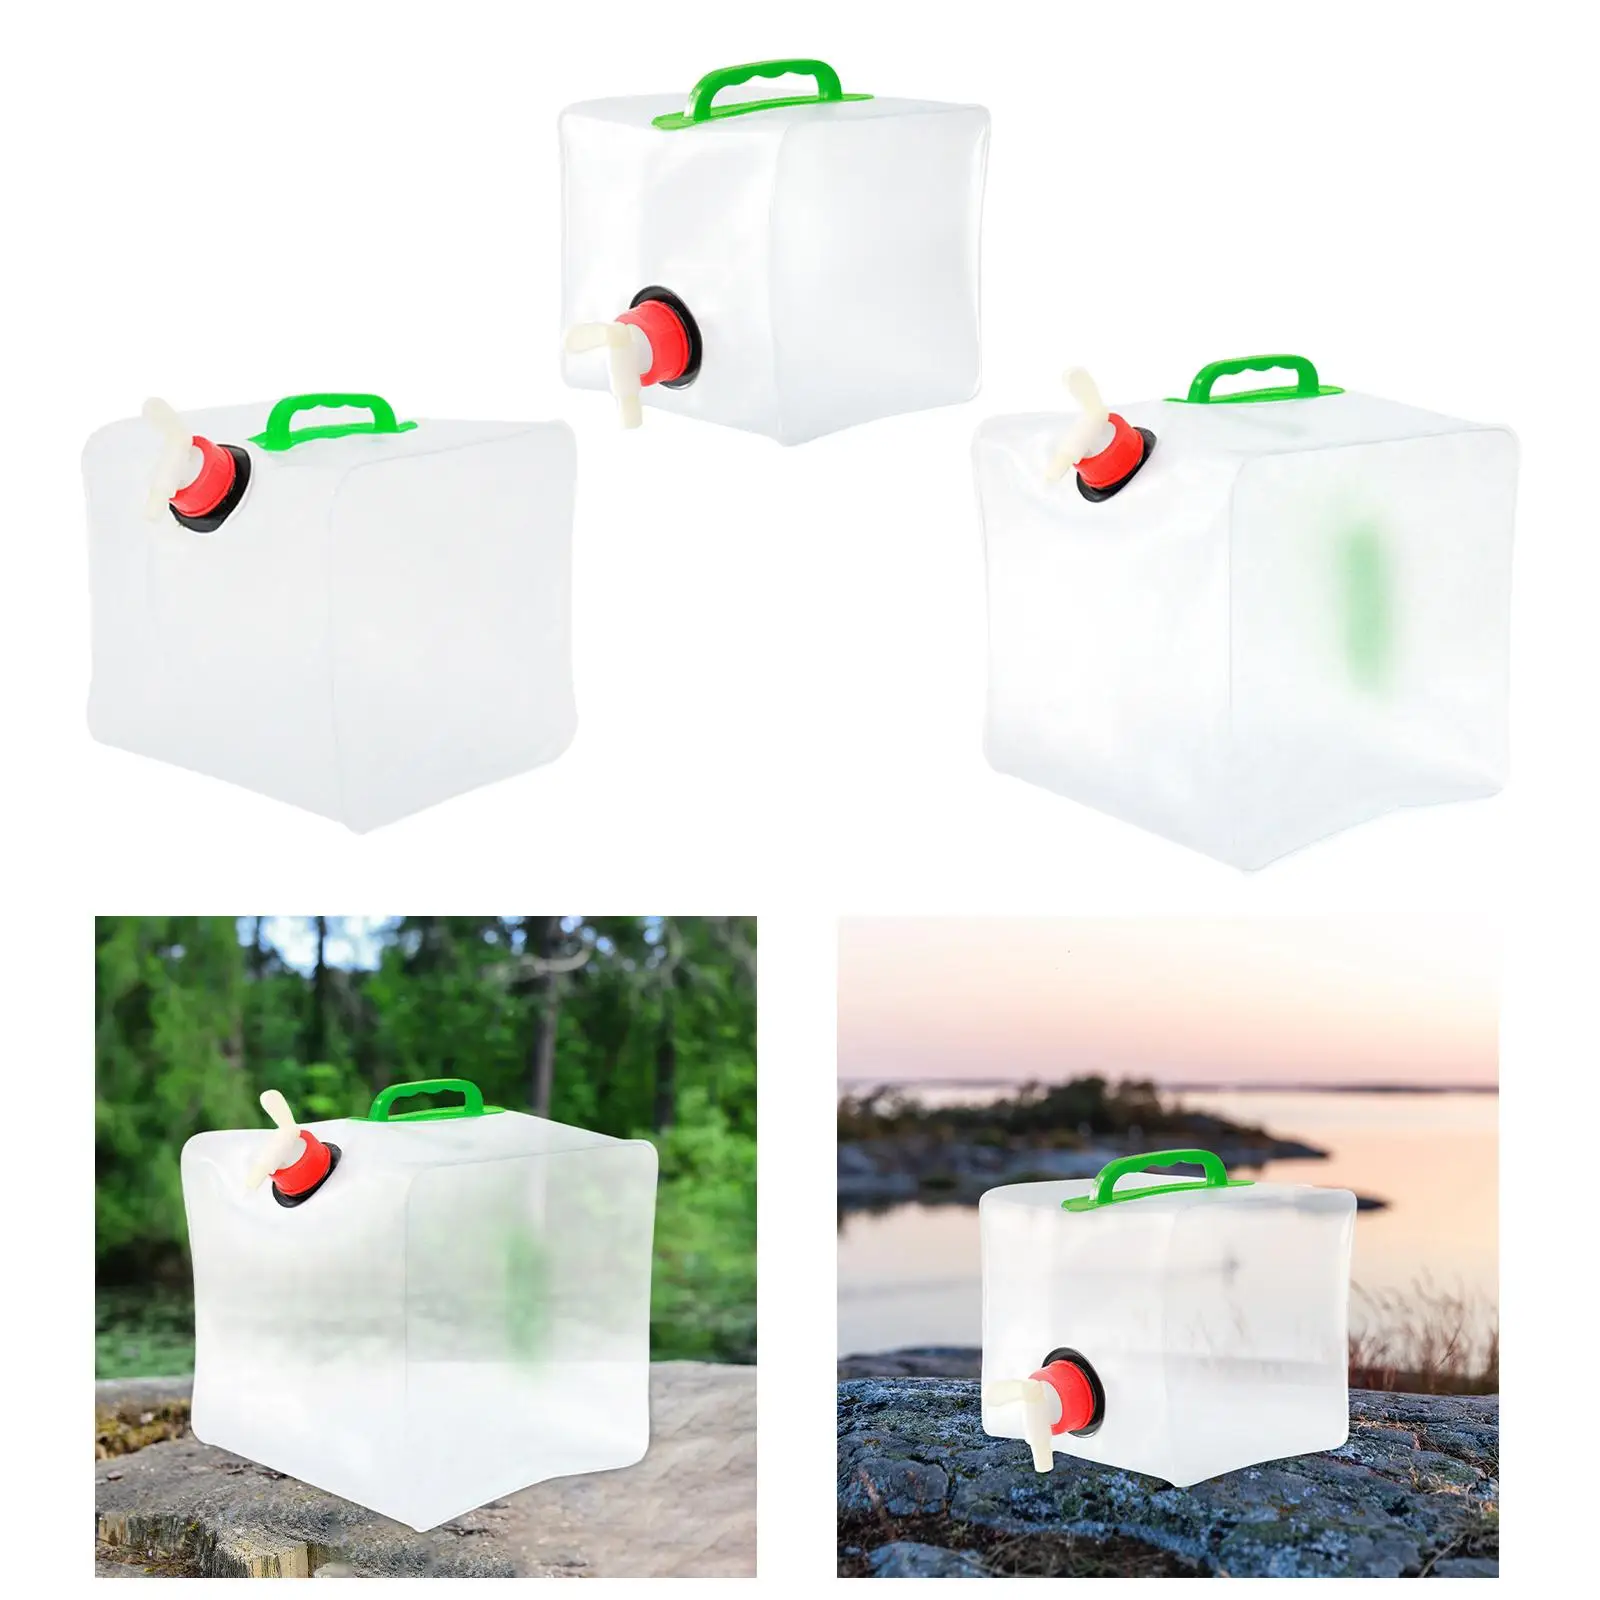 Collapsible Water Container Bag Drink Dispenser Equipment with Lid and Handle Water Bottle Carrier Water Storage Jug for Hiking